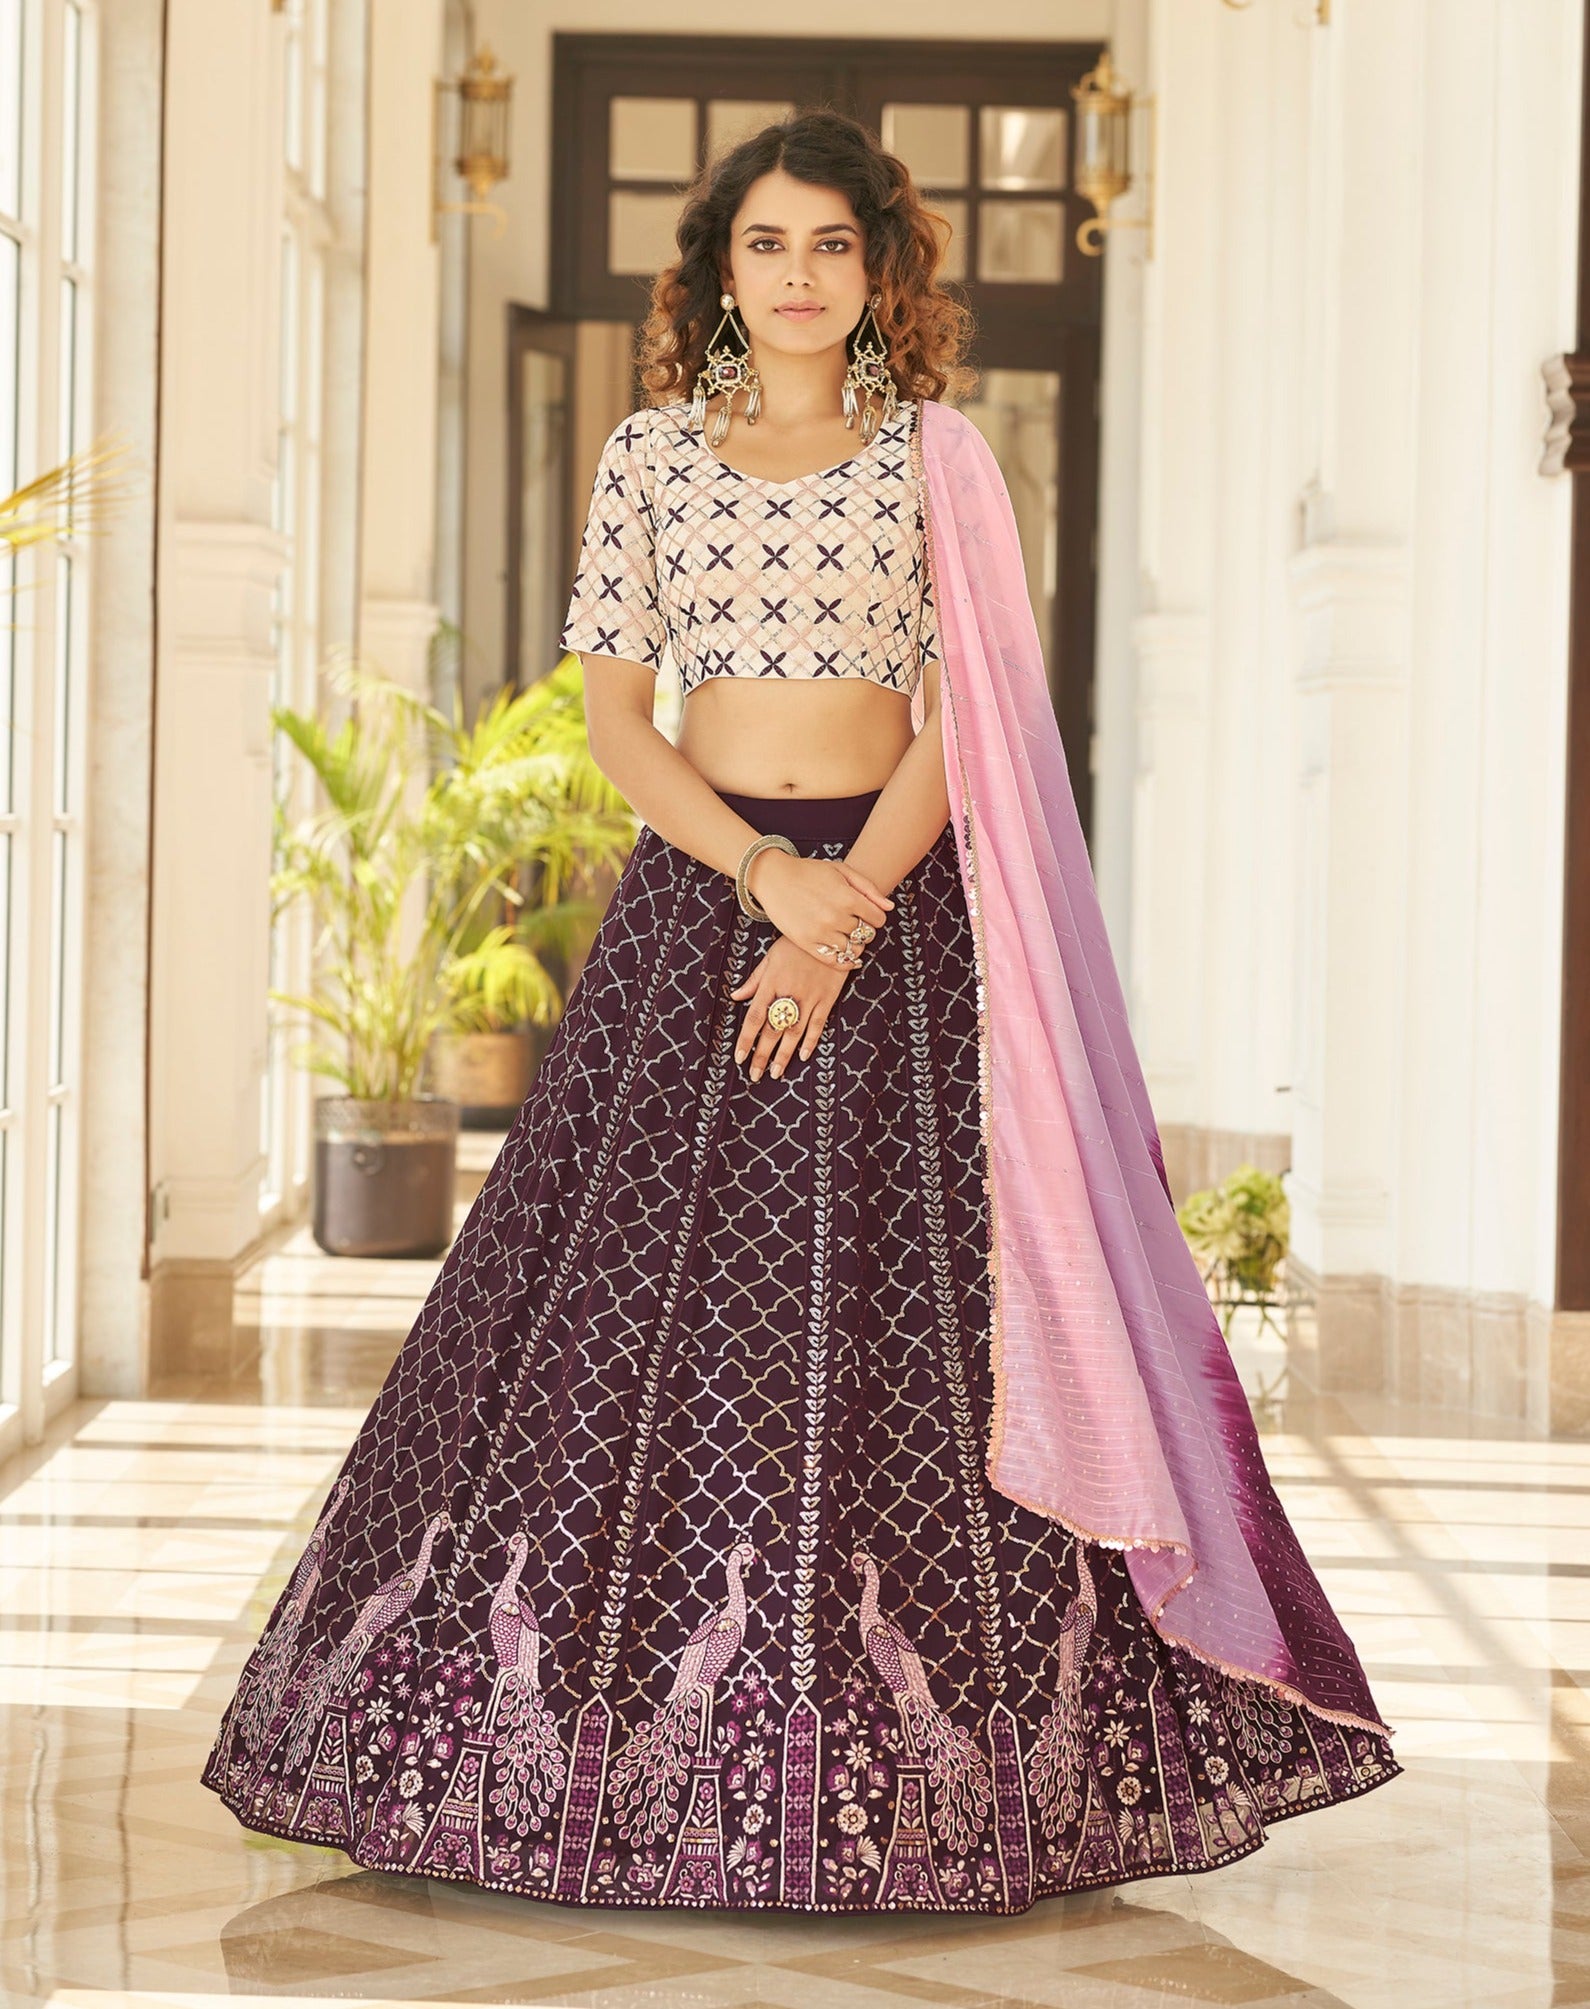 Violet Lehenga With Intricate Handwork Paired With A Pink Dupatta - QUENCH  A THIRST - 3951722